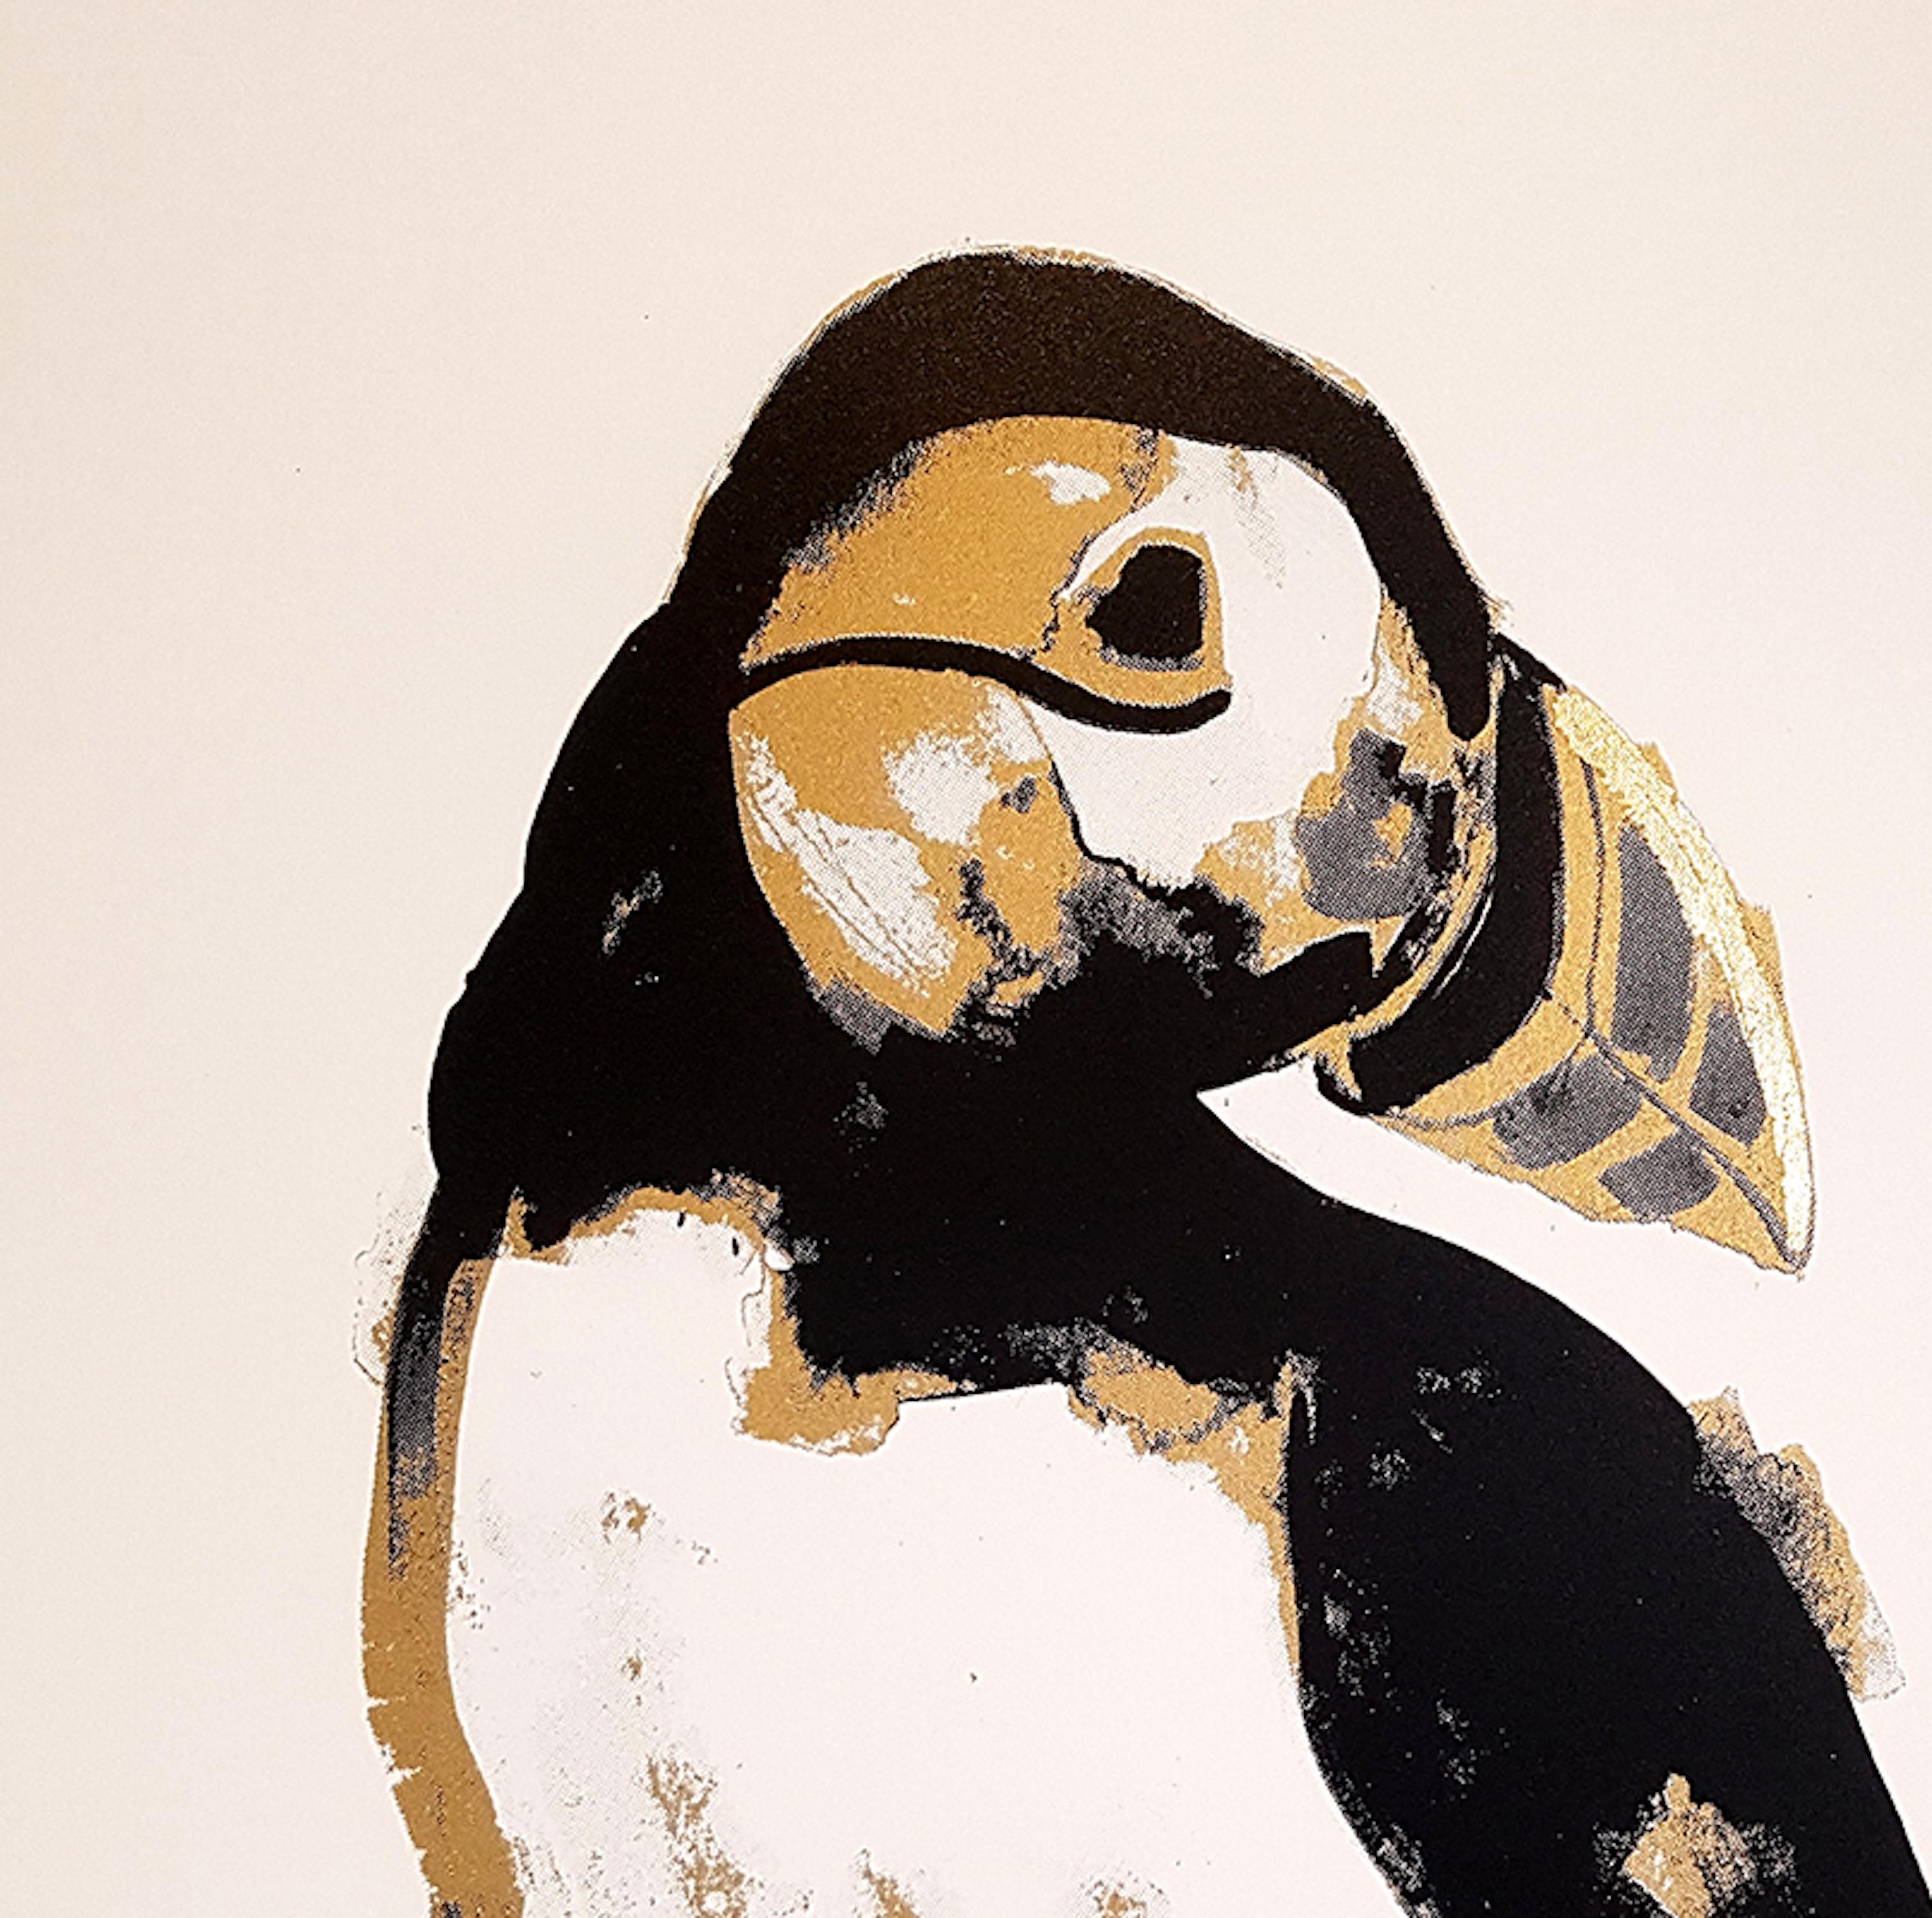 Gavin Dobson
Puffin Gold
Limited Edition Screen Print
Edition of 50
Signed
Size: H 50cm x W 35cm x D 0.1cm
Puffin Gold is a limited edition print by Gavin Dobson. A special gold edition of this best selling piece. Satin black ink with a vintage gold